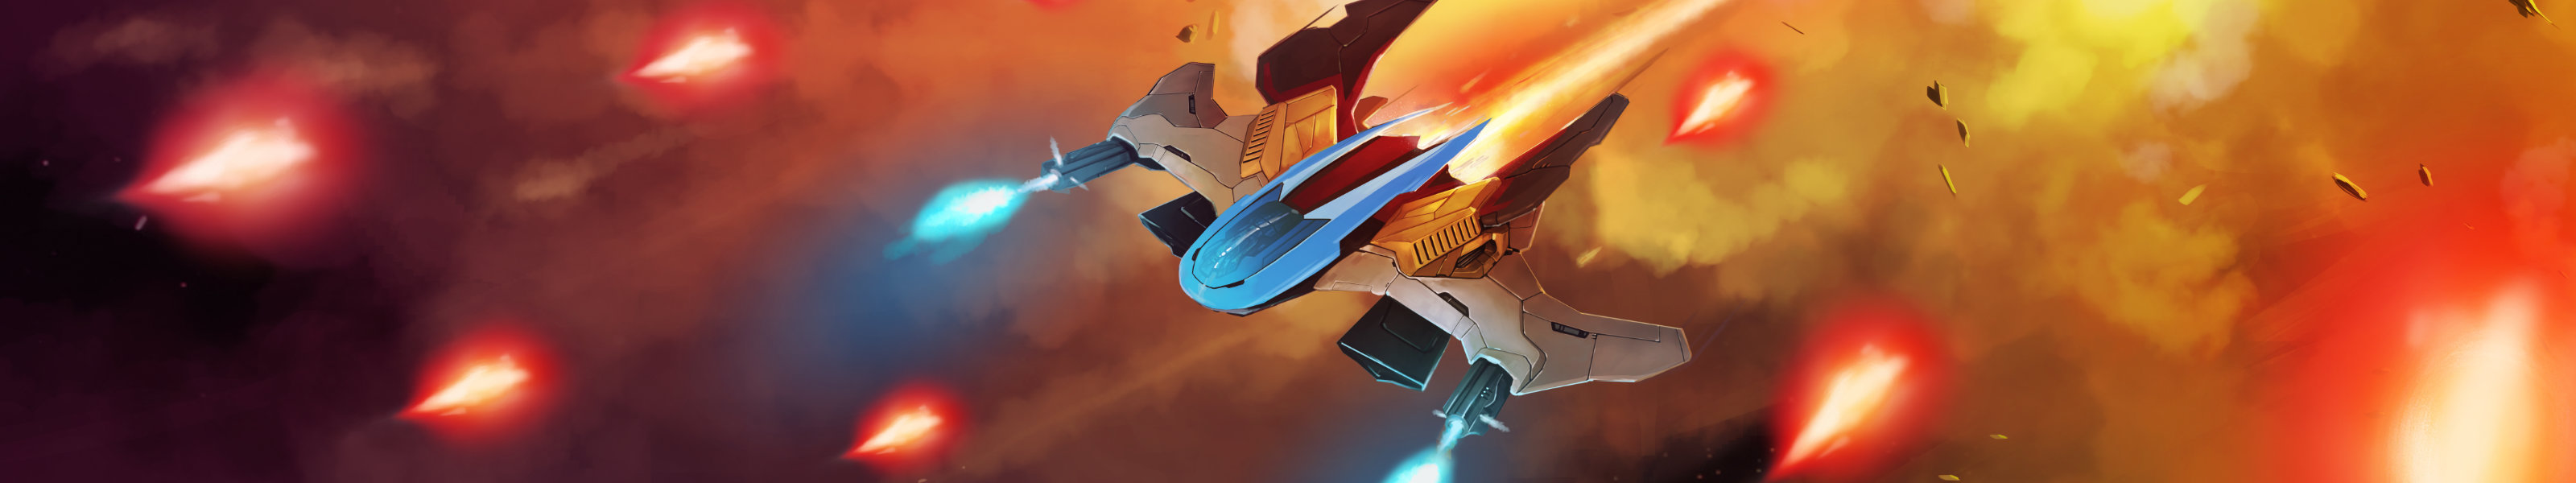 A Phoenix ship flies through enemy projectiles, guns blazing. An explosion is in the background.